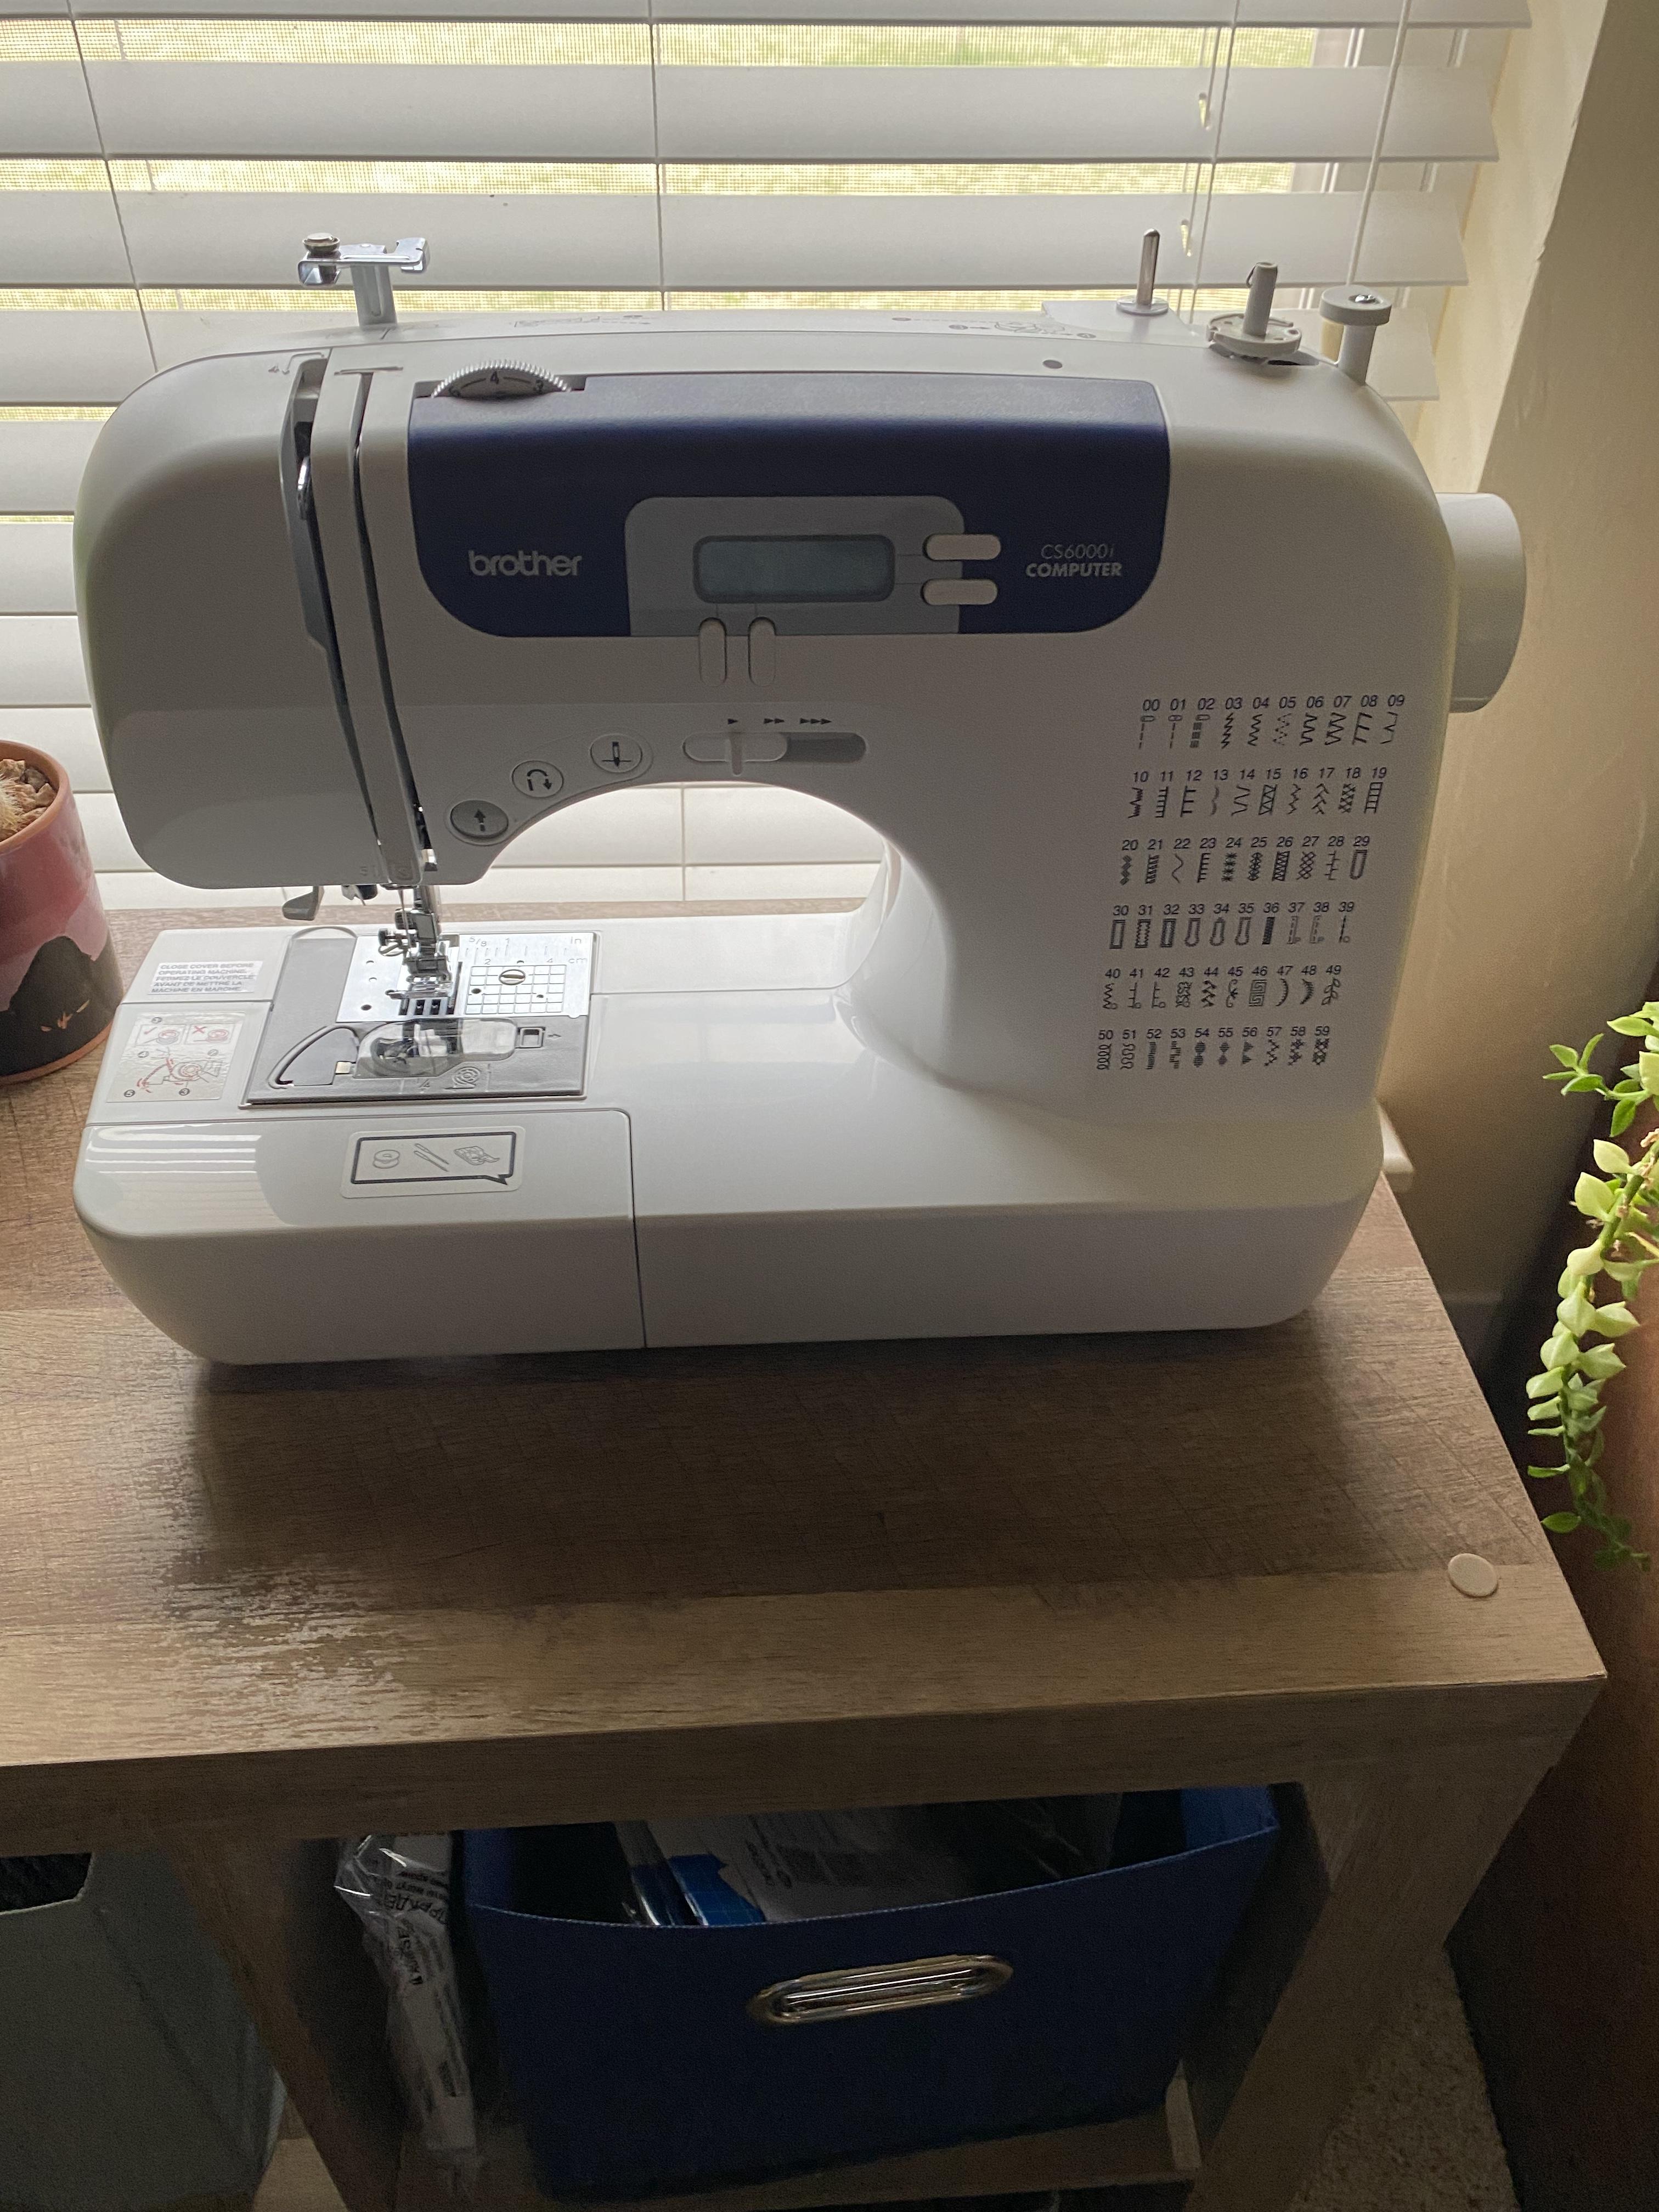 Brother cs6000i Sewing Machine Review - Tools For Quilting